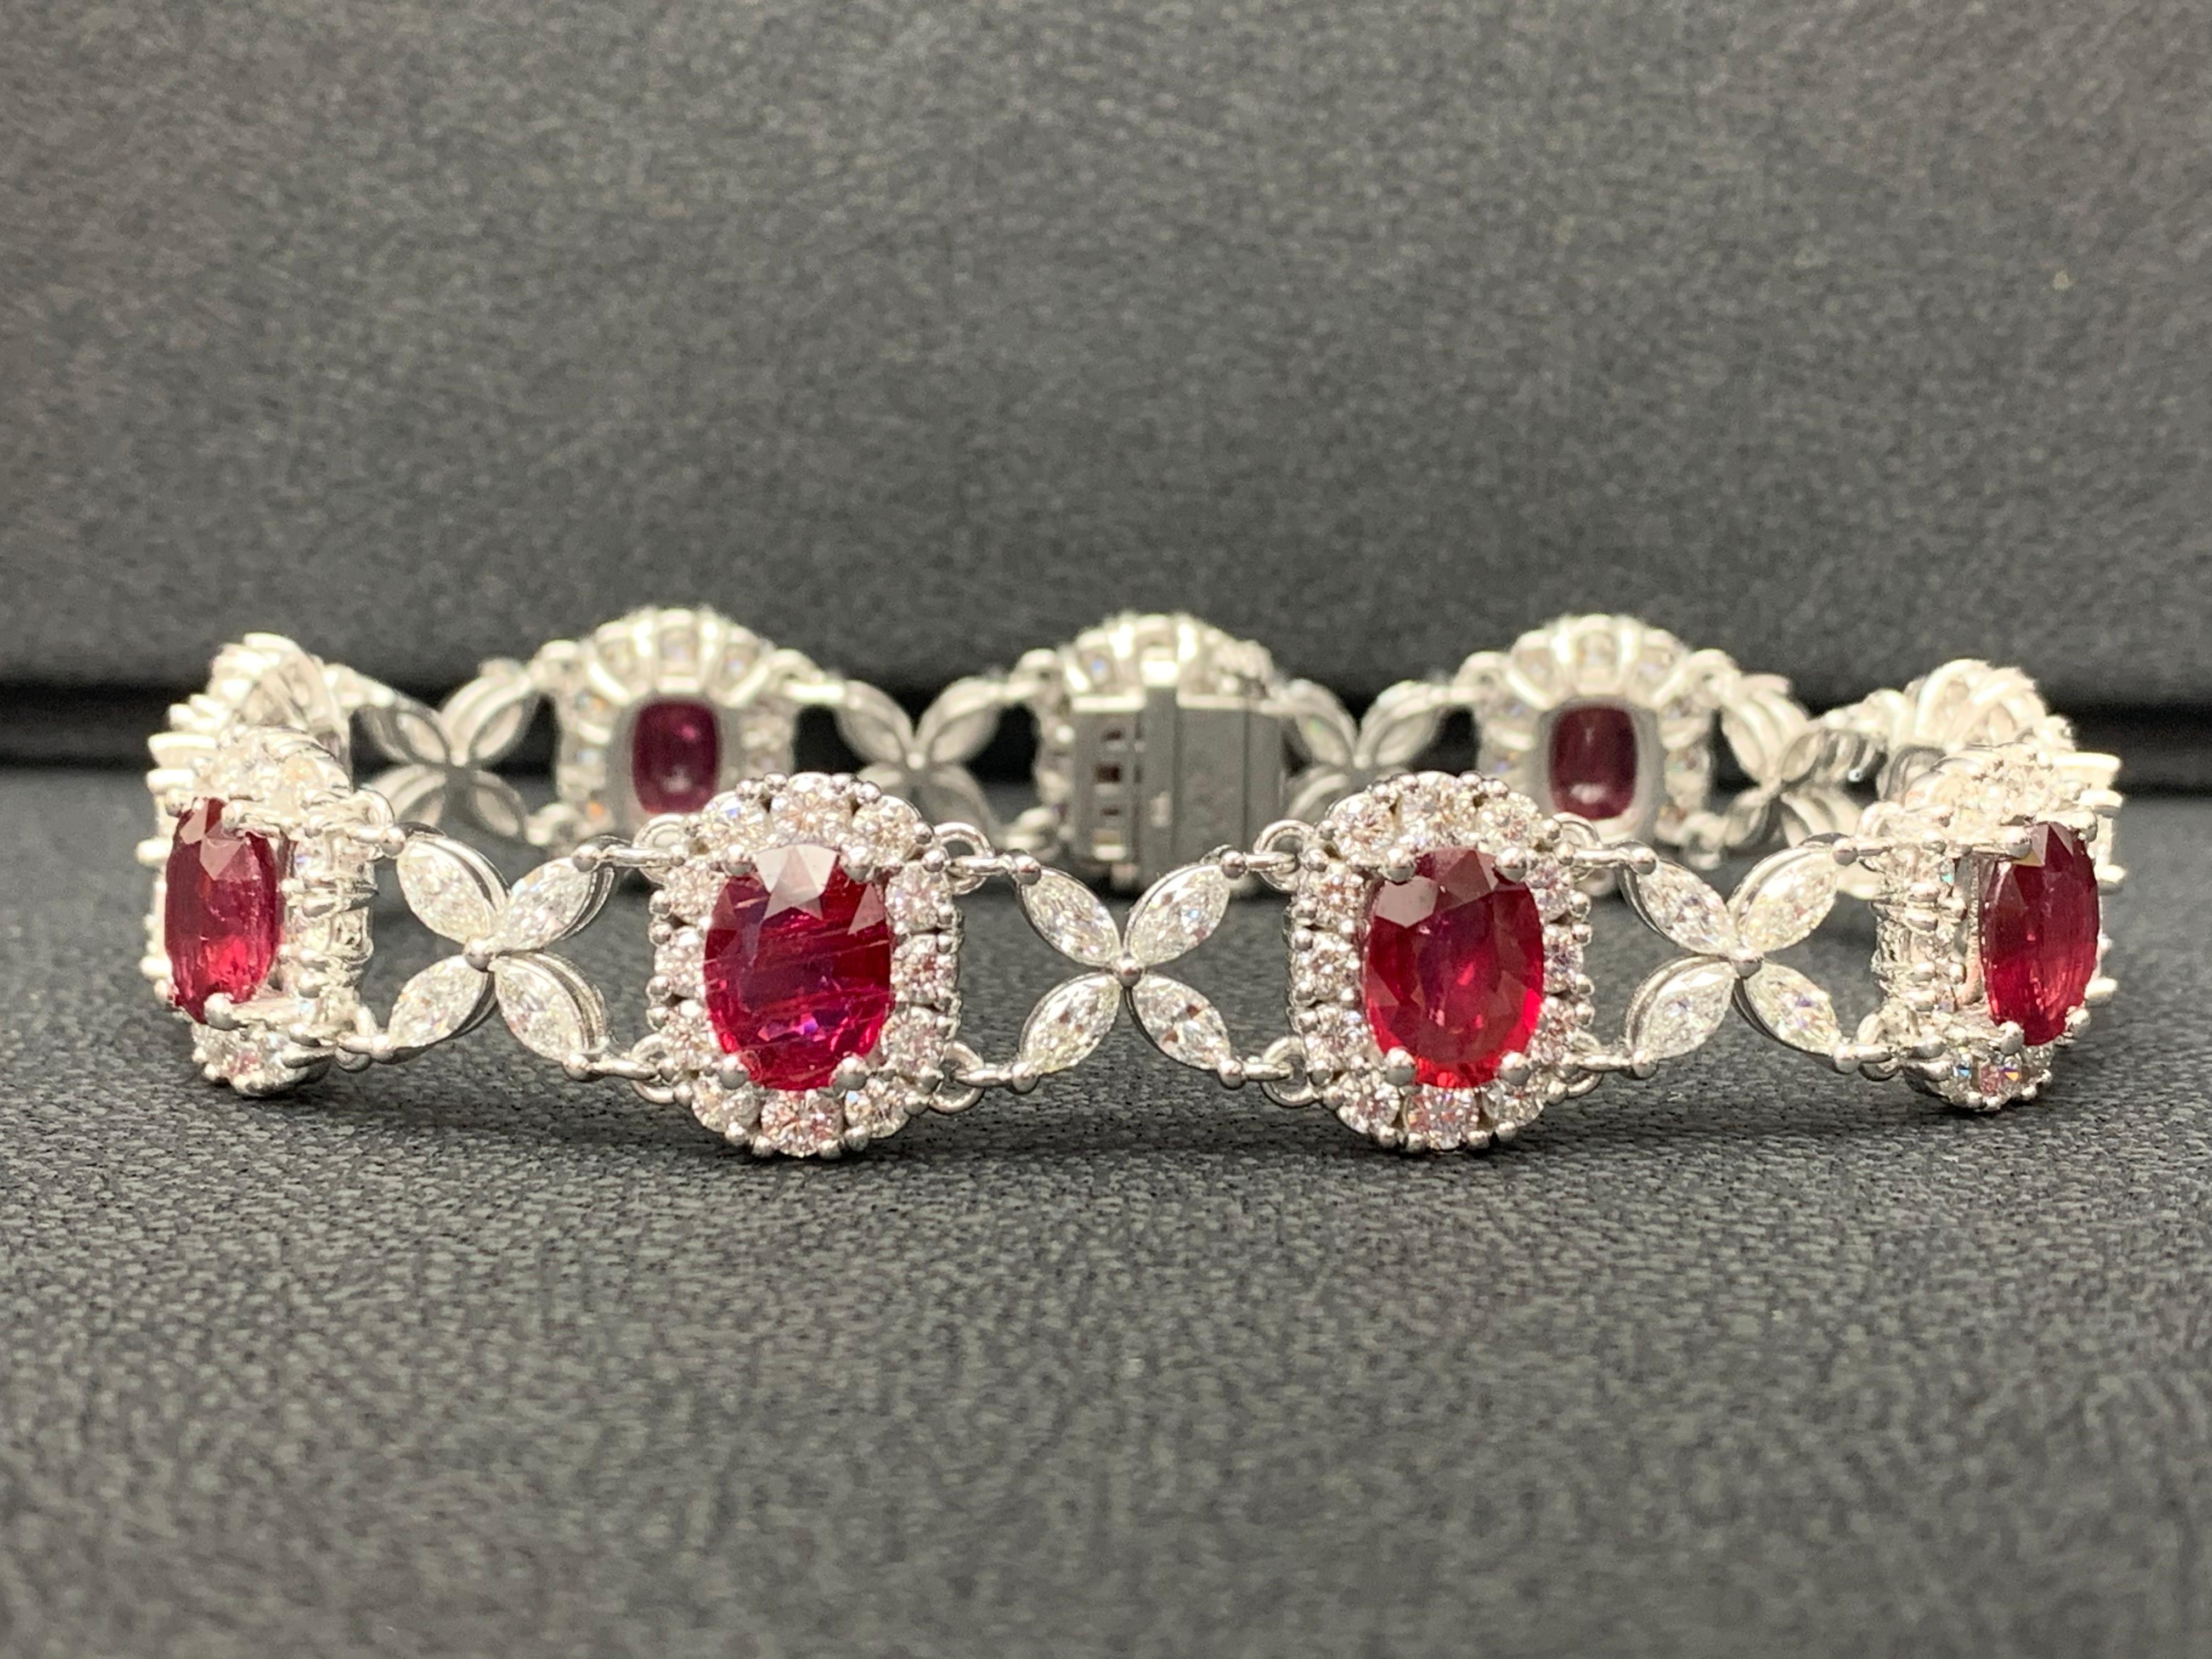 12.54 Carat Oval Cut Ruby and Diamond Tennis Bracelet in 14K White Gold For Sale 4